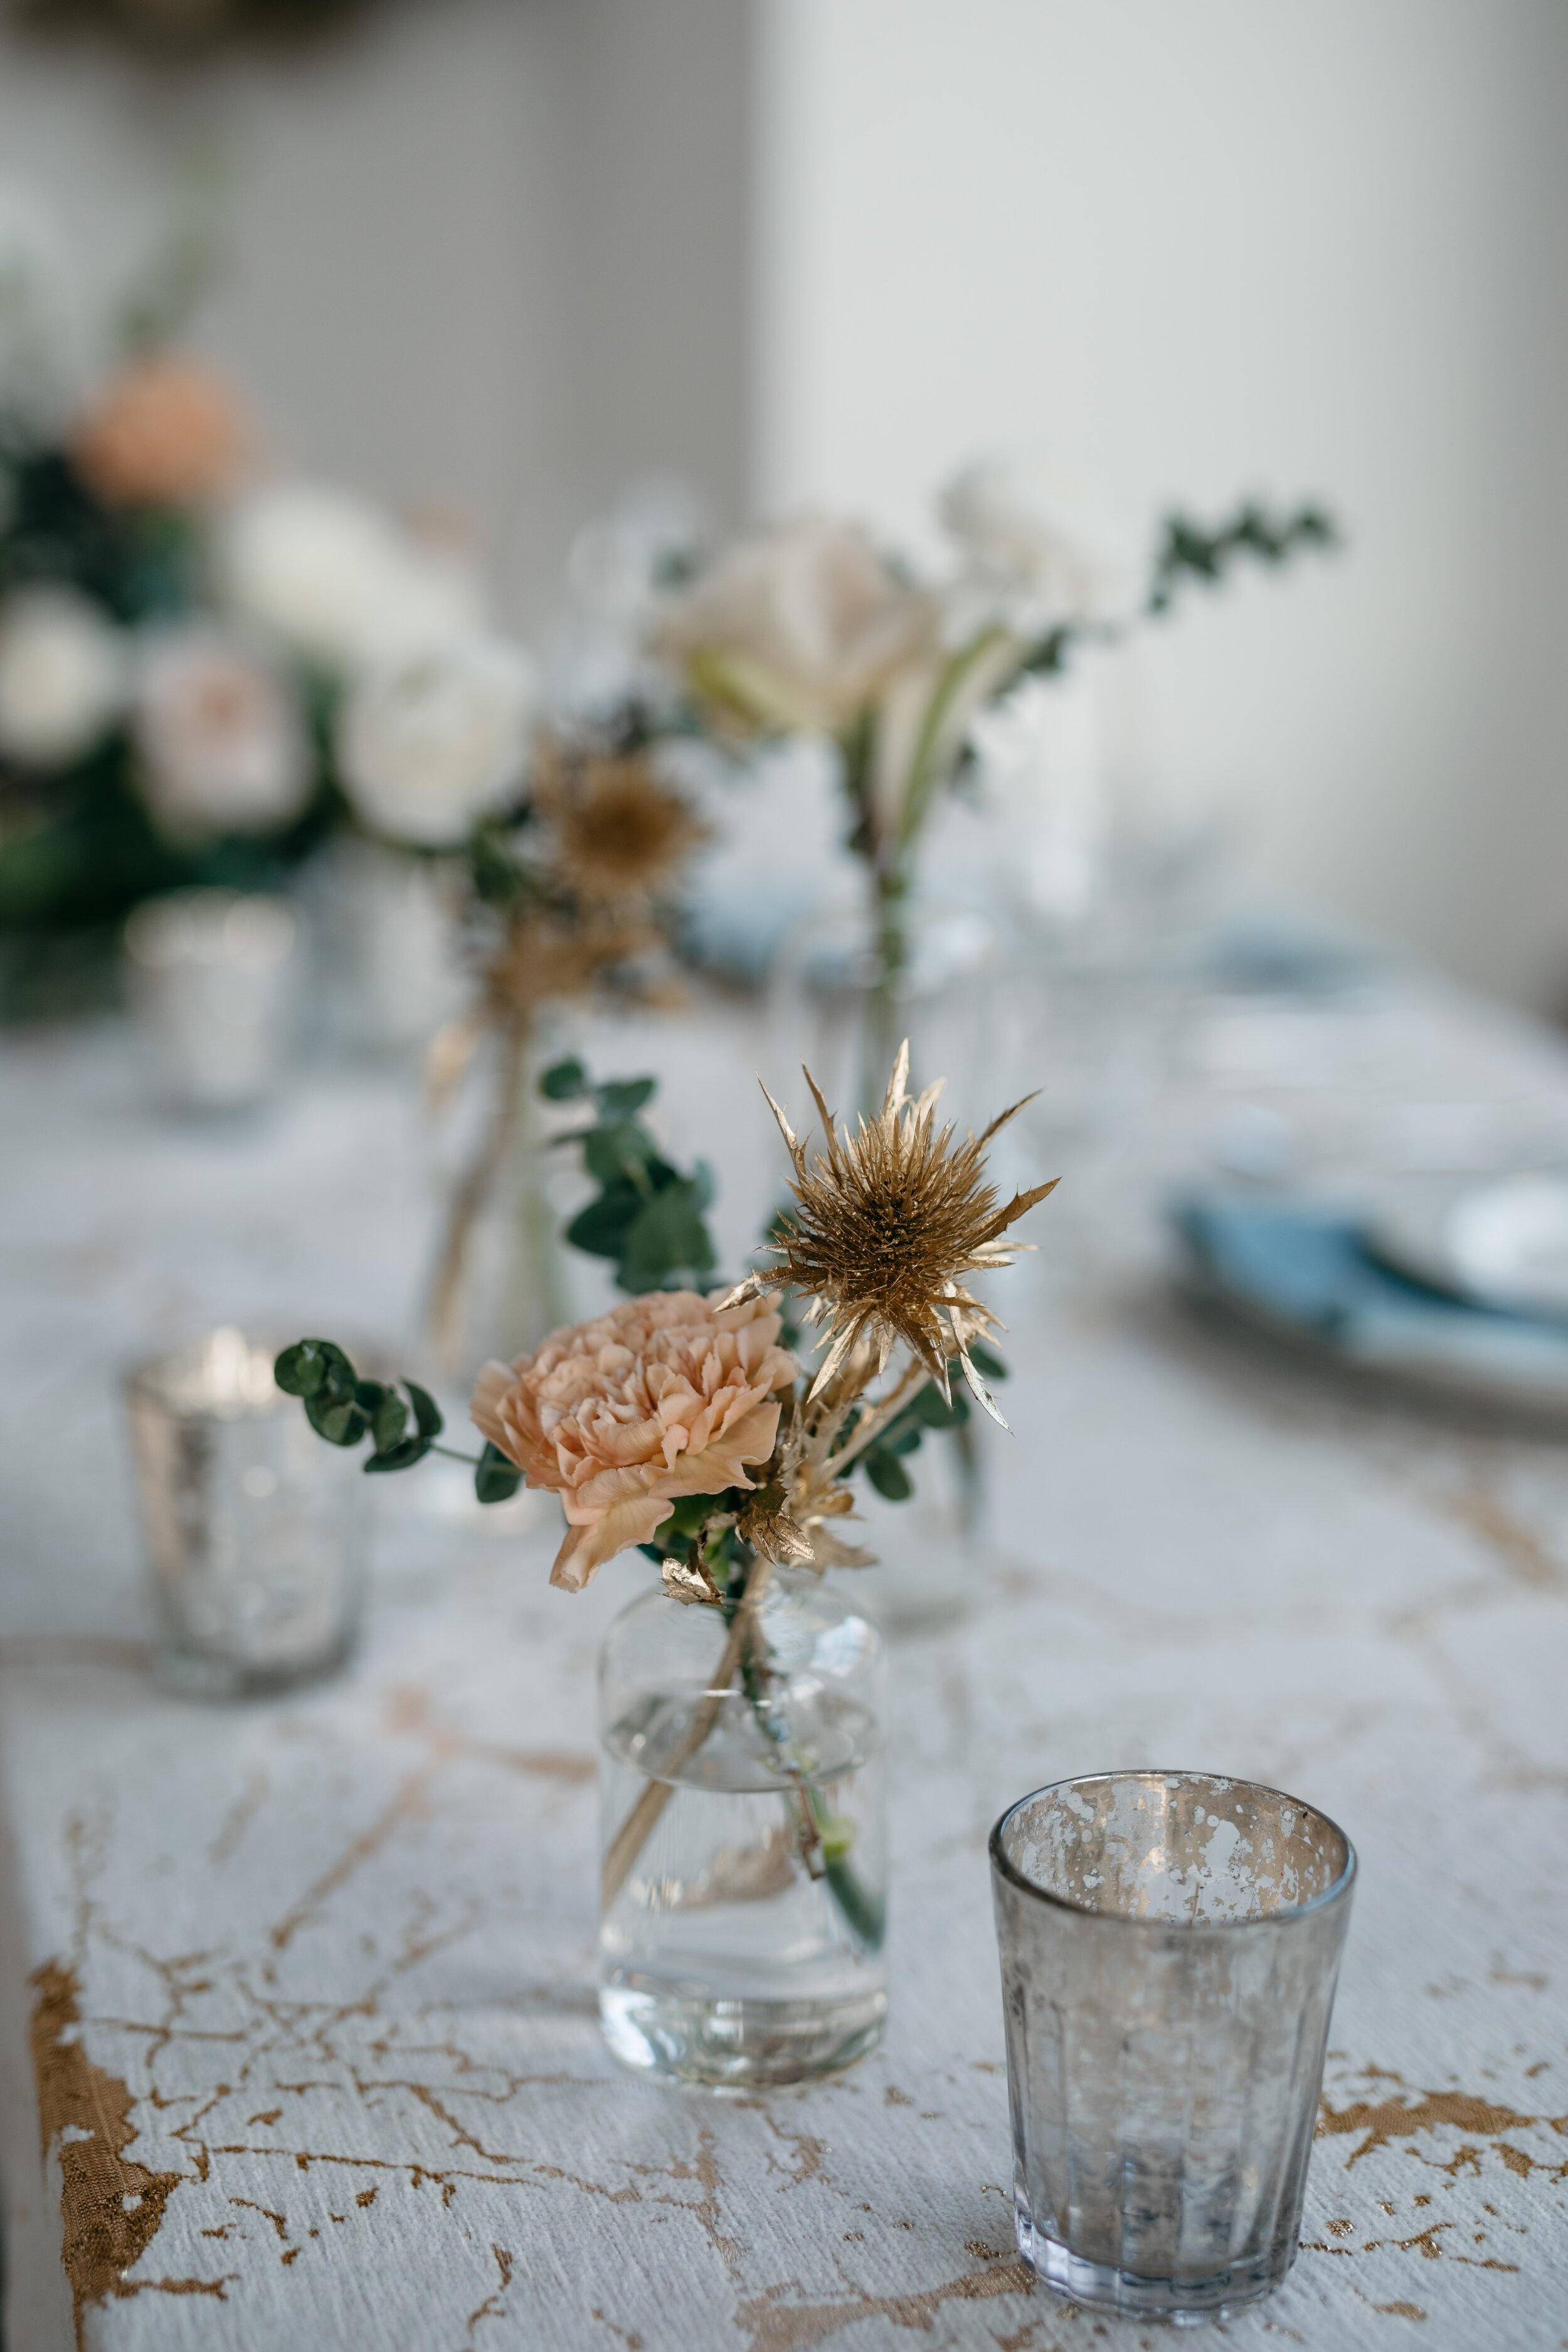 Winter inspiration tablescape featuring sweet bud vases of white roses, touches of gold, baby eucalyptus, and earth tone carnations. Nashville wedding florist Rosemary & Finch at OZARI.